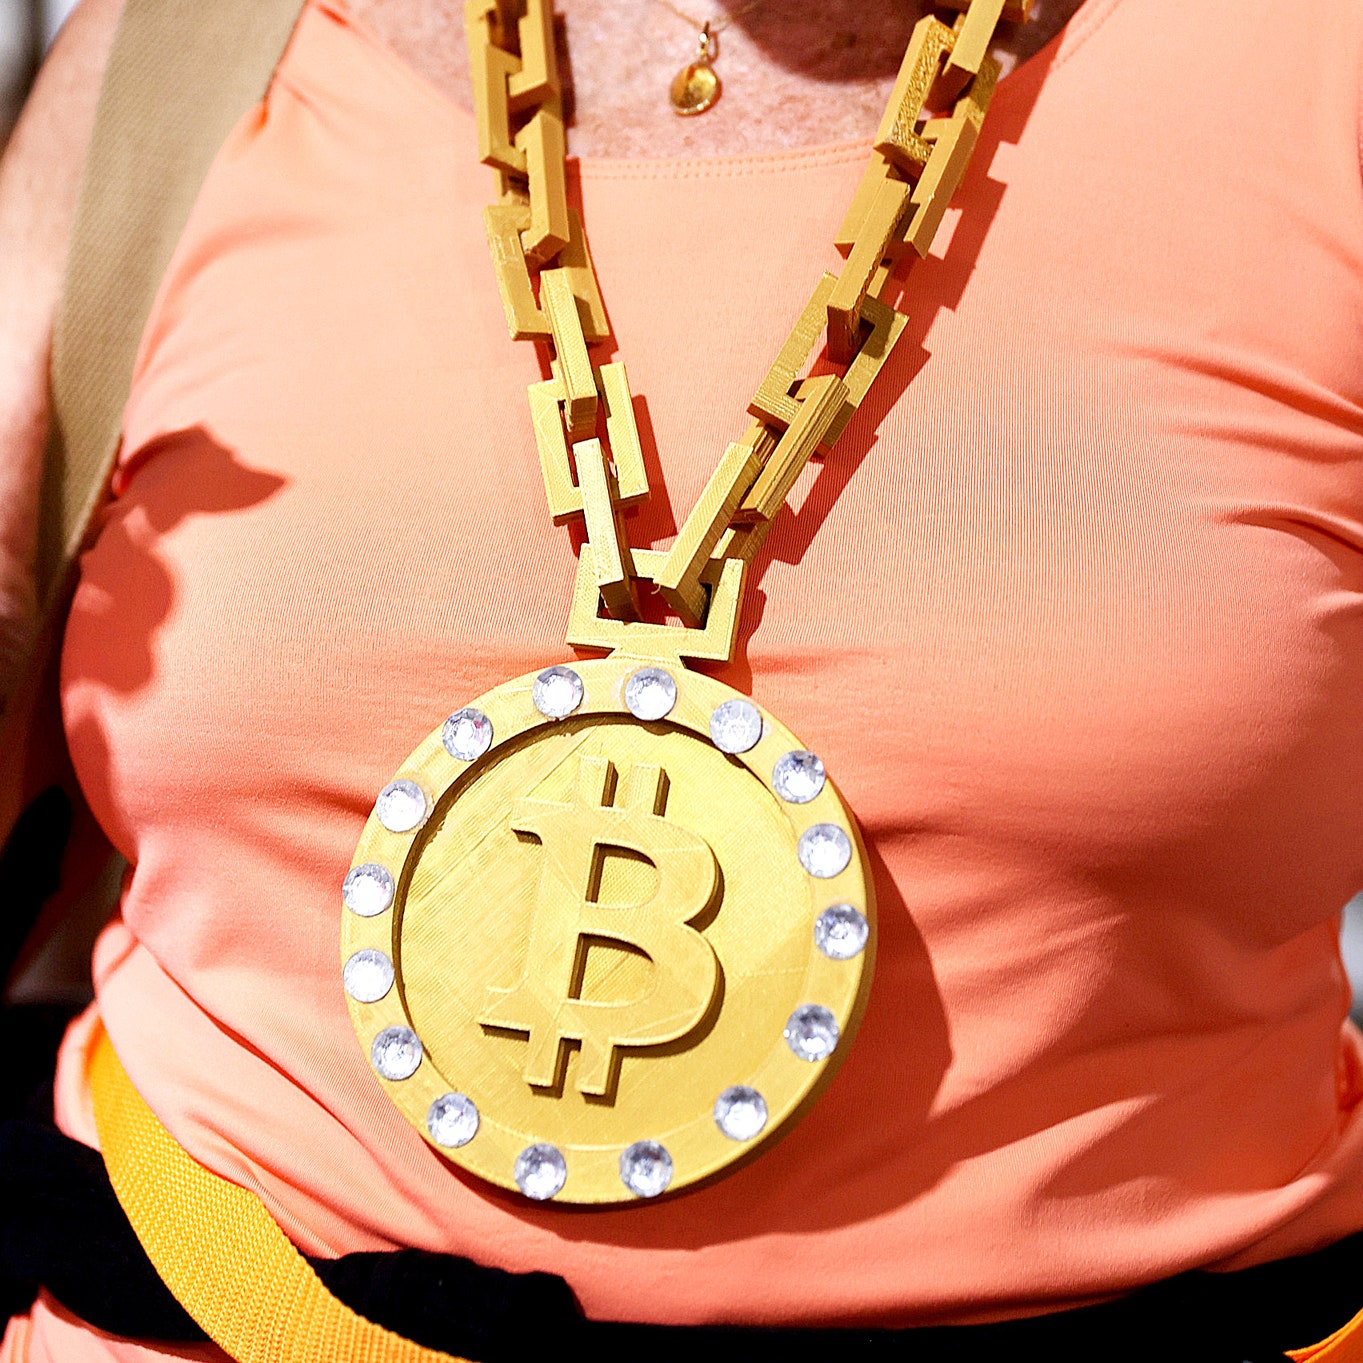 An attendee wears a necklace at the Bitcoin 2021 Convention